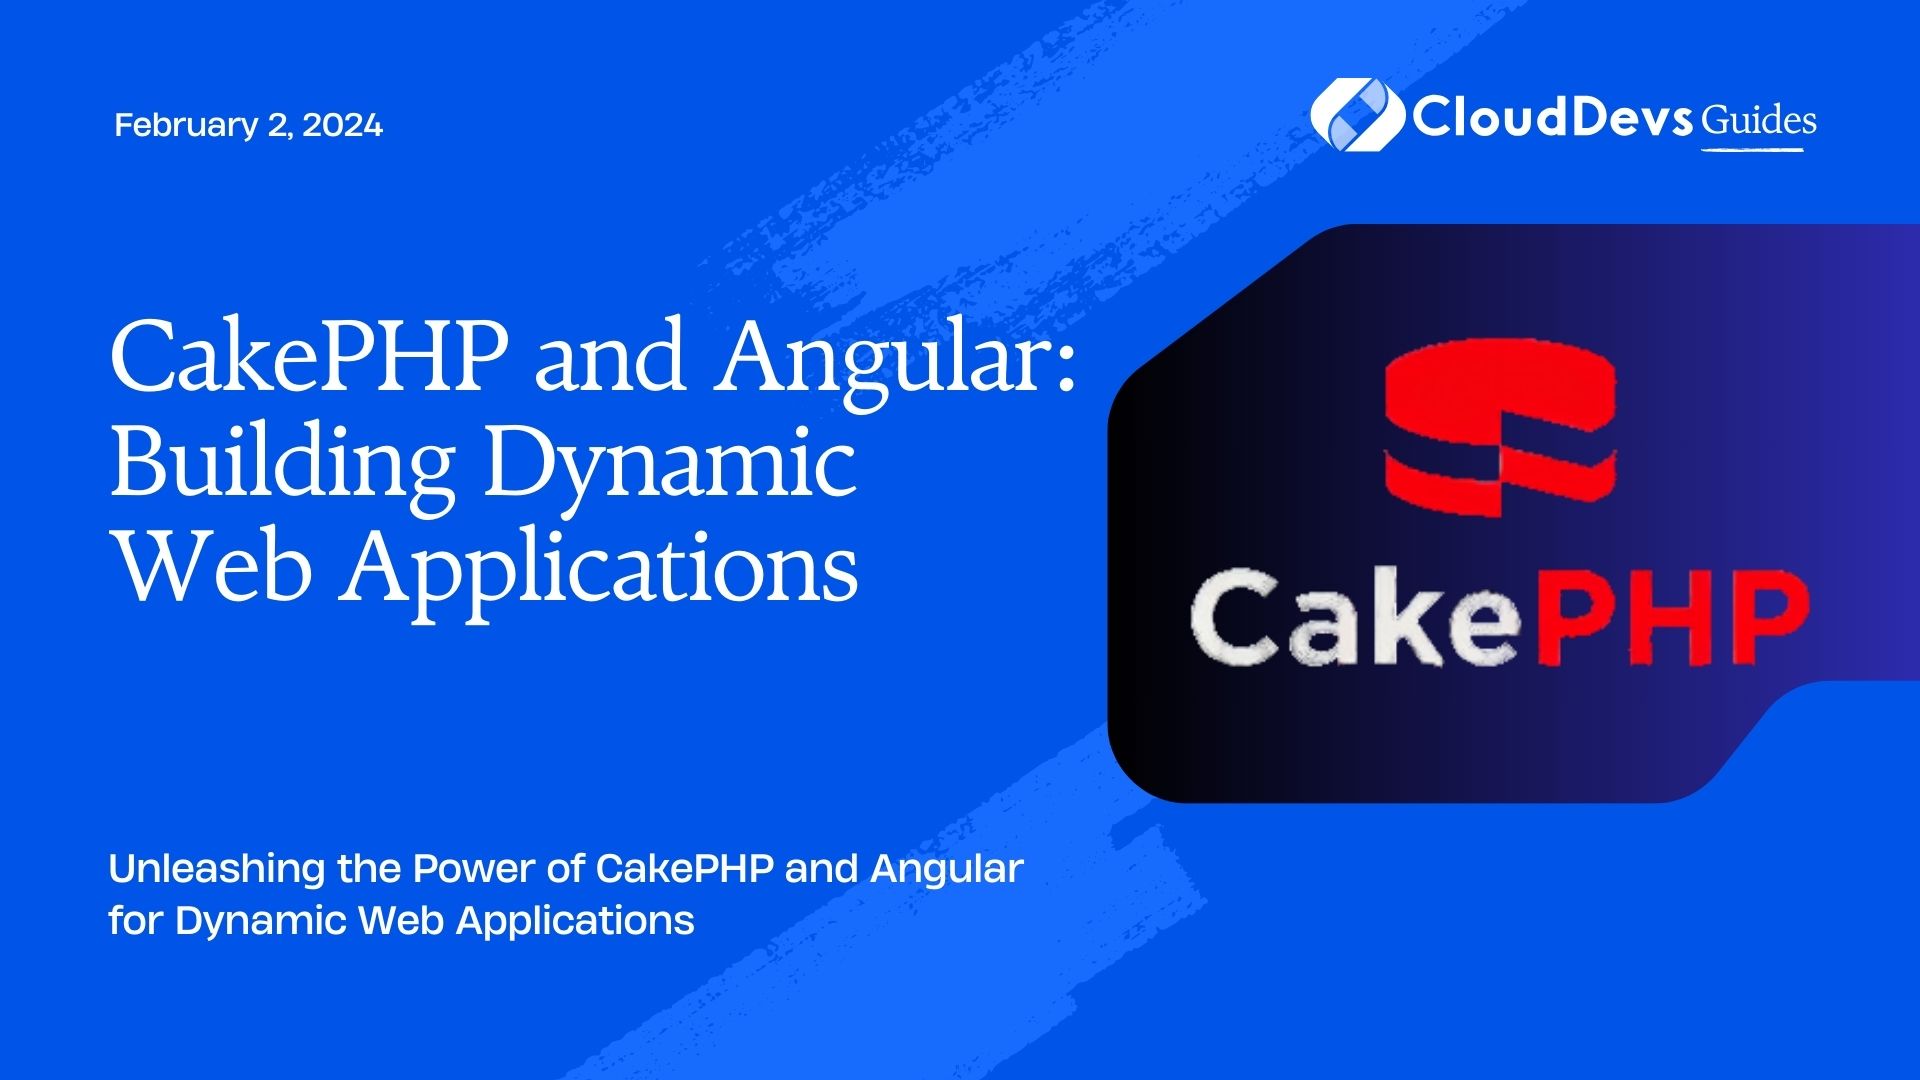 CakePHP and Angular: Building Dynamic Web Applications